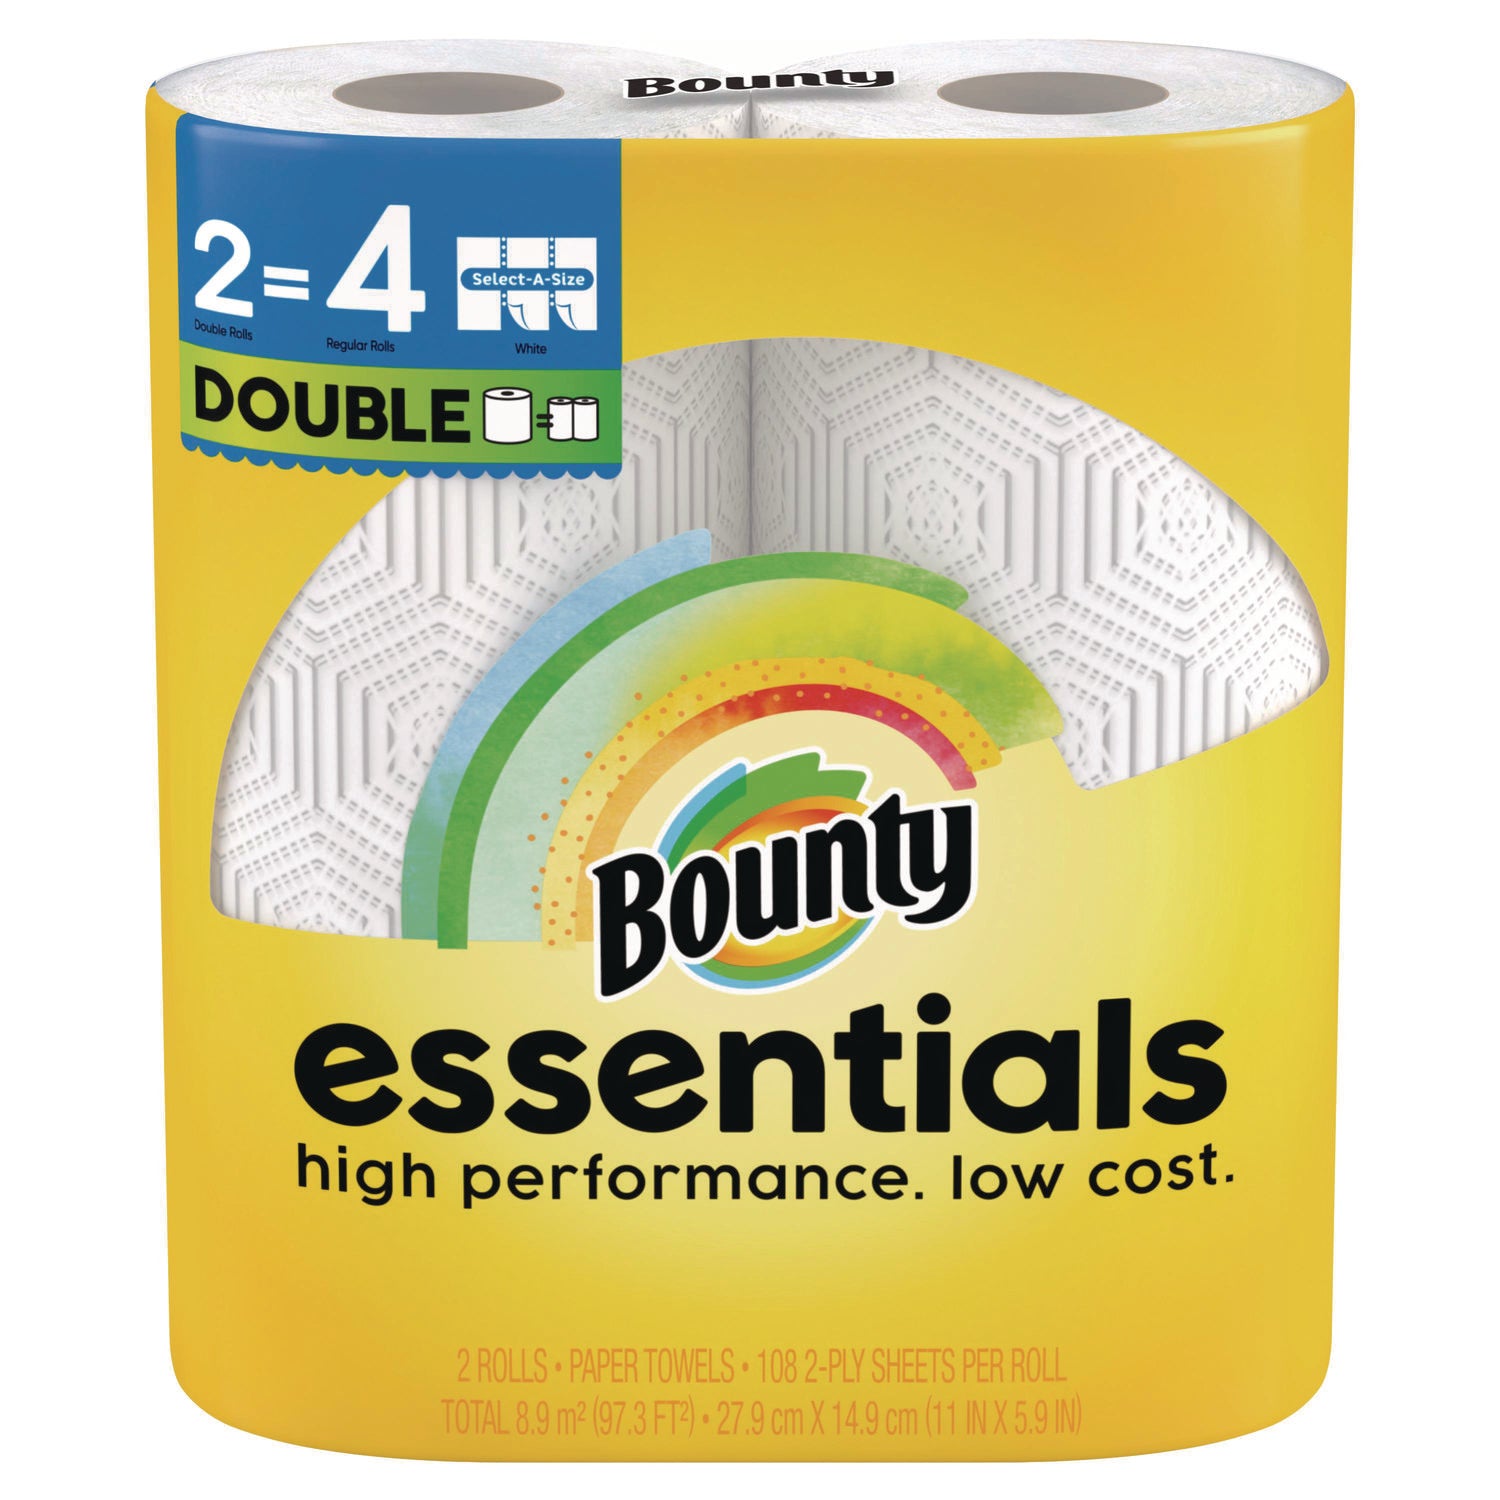 essentials-select-a-size-kitchen-roll-paper-towels-2-ply-white-108-sheets-roll-2-pack-8-packs-carton_pgc14019 - 1